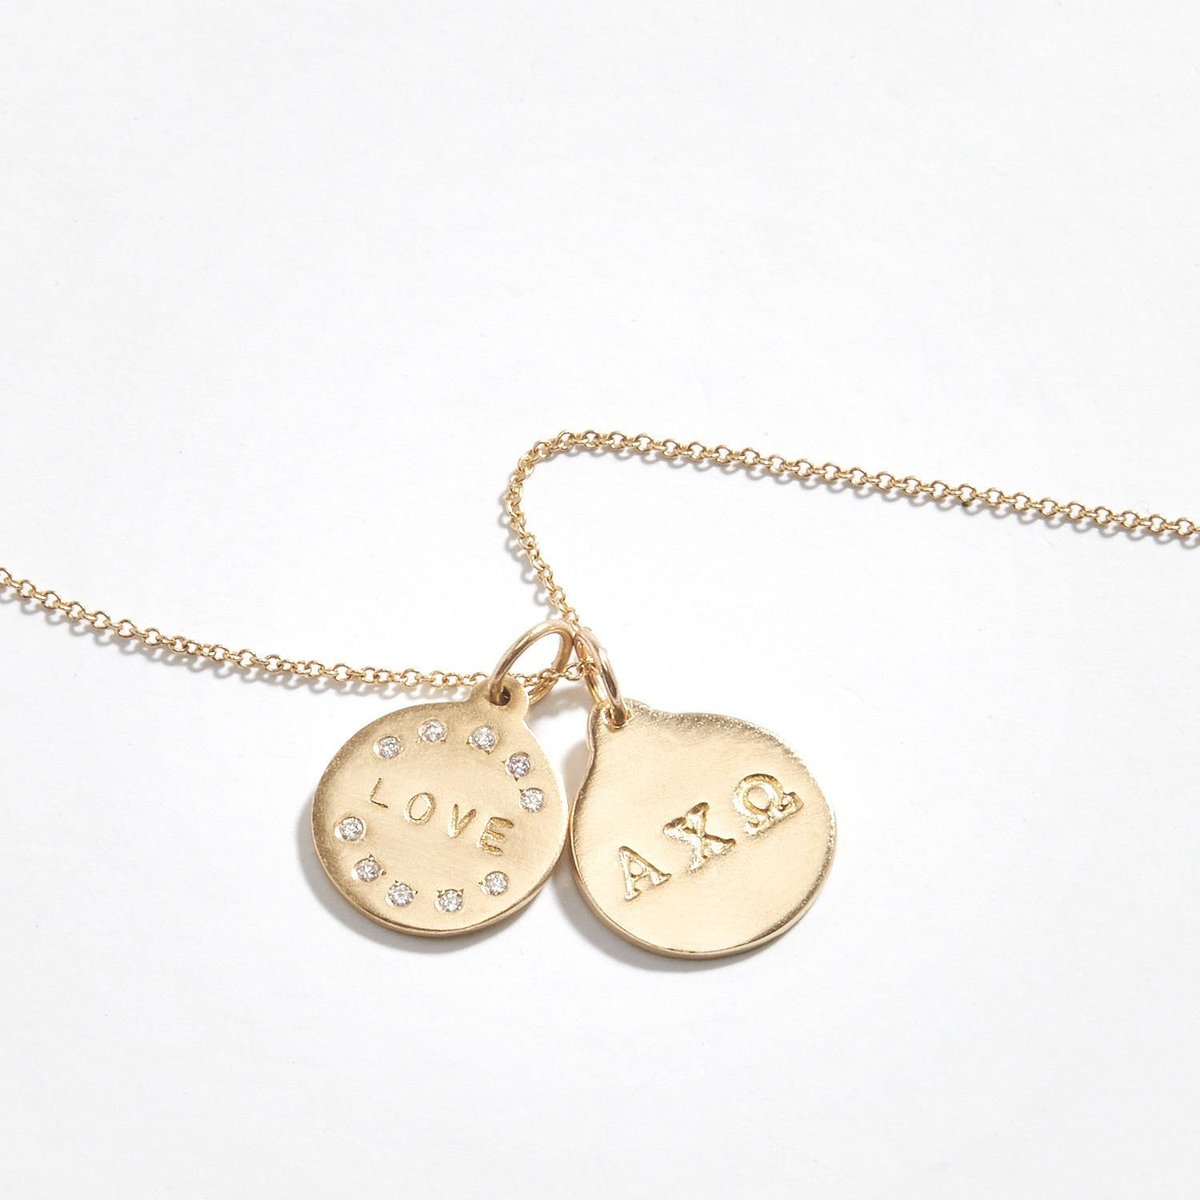 Gold Charms for Necklaces | Helen Ficalora Charms